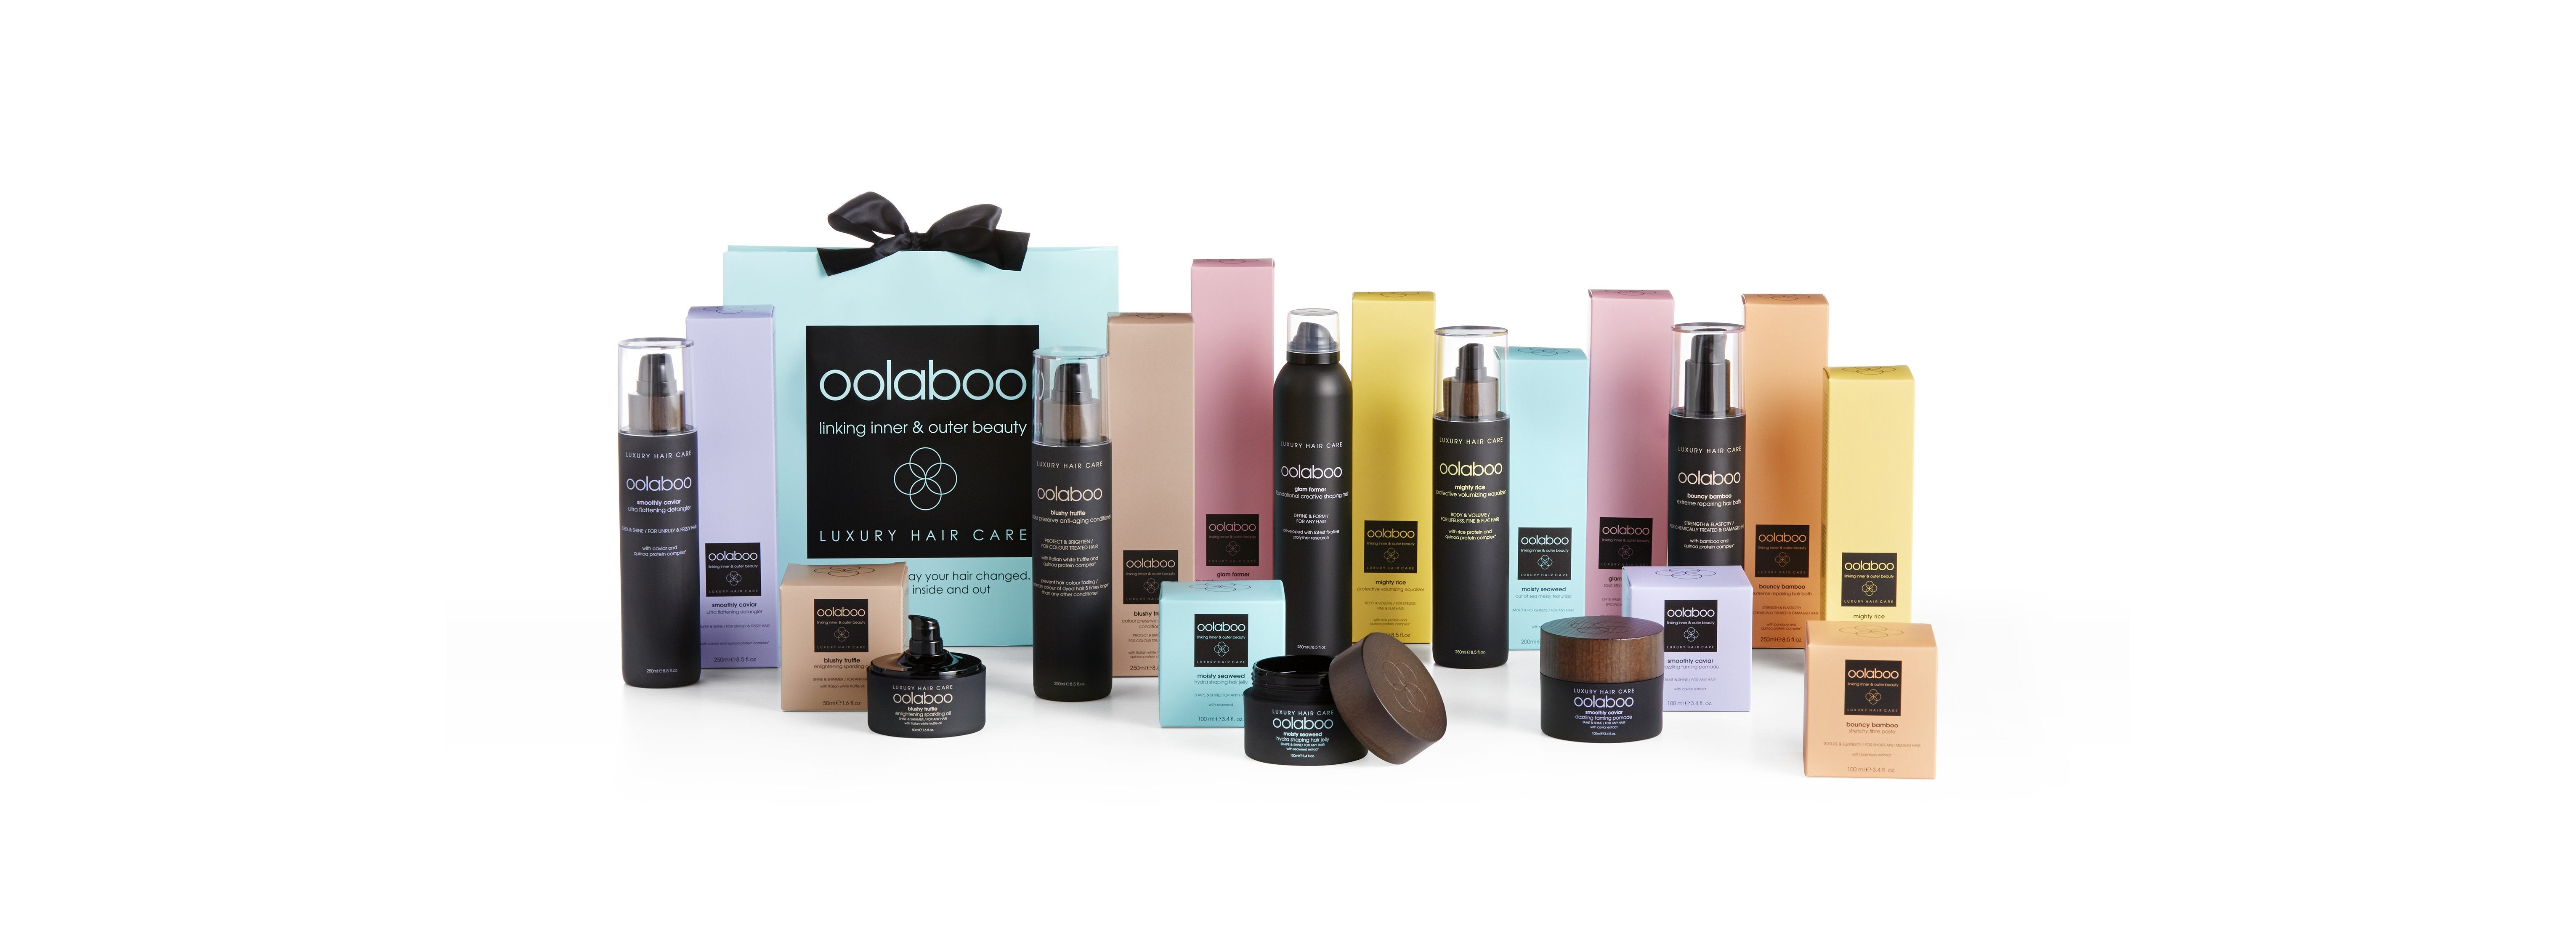 Oolaboo Collection